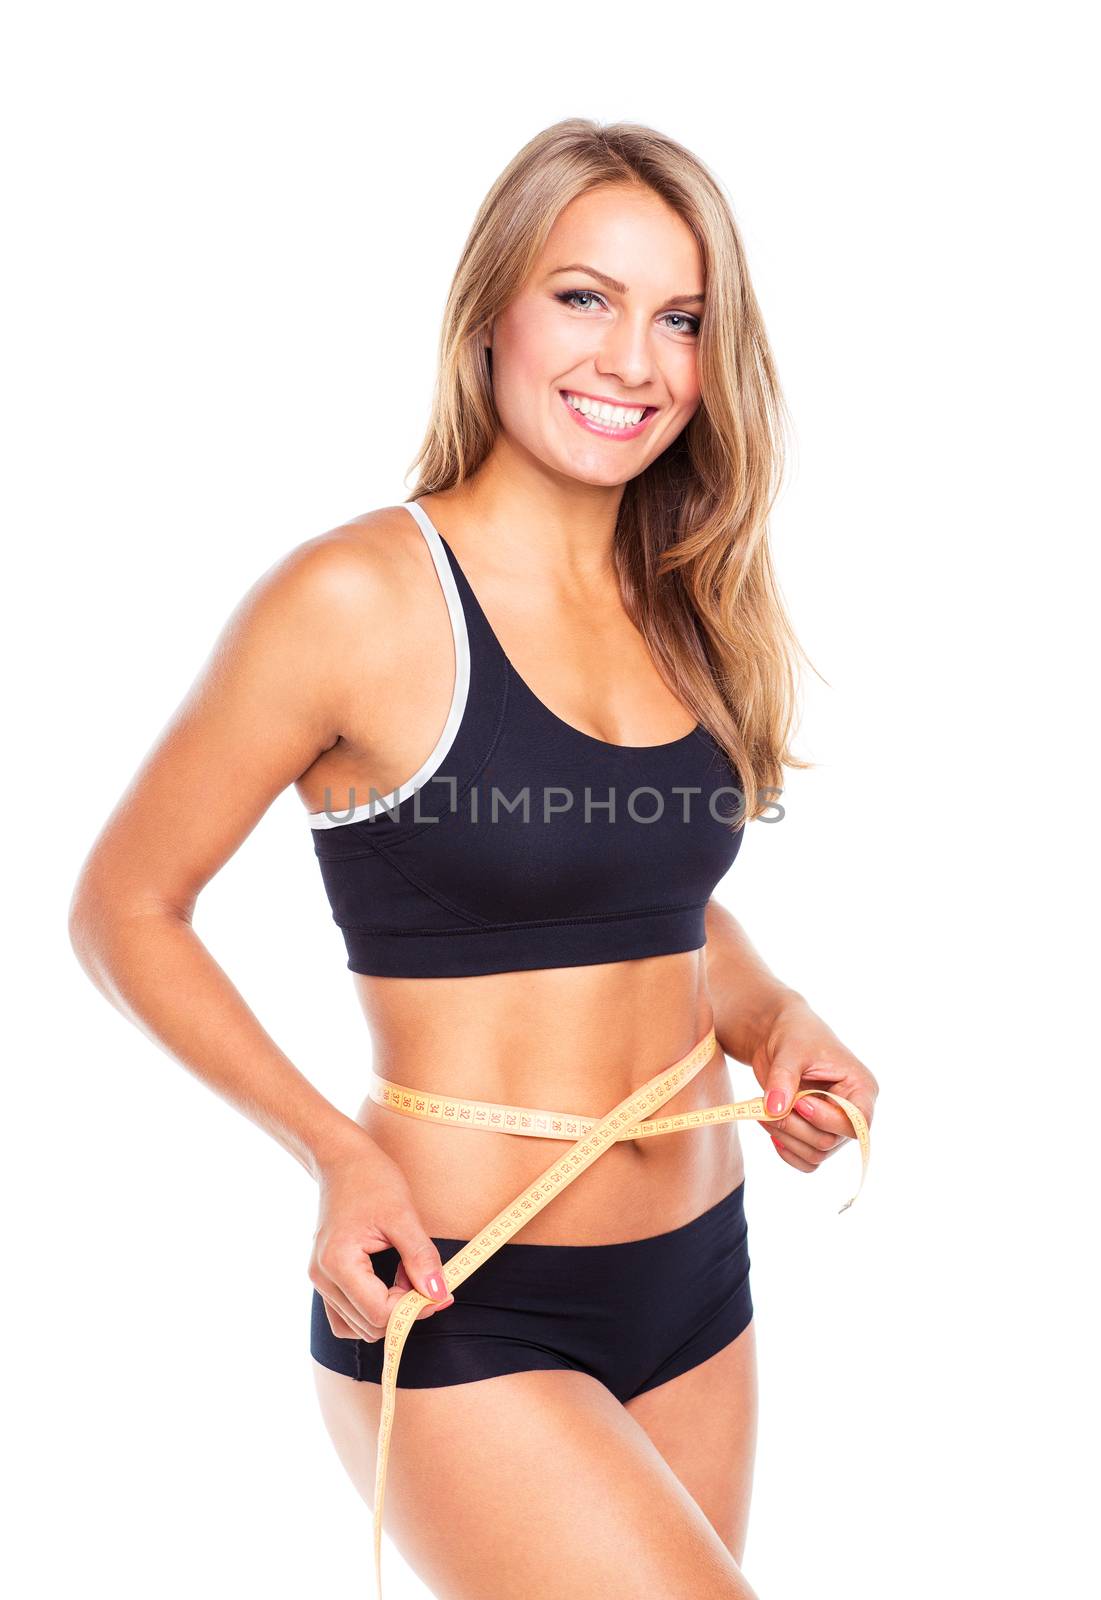 Woman measuring perfect shape of beautiful thigh, healthy lifestyles concept on white